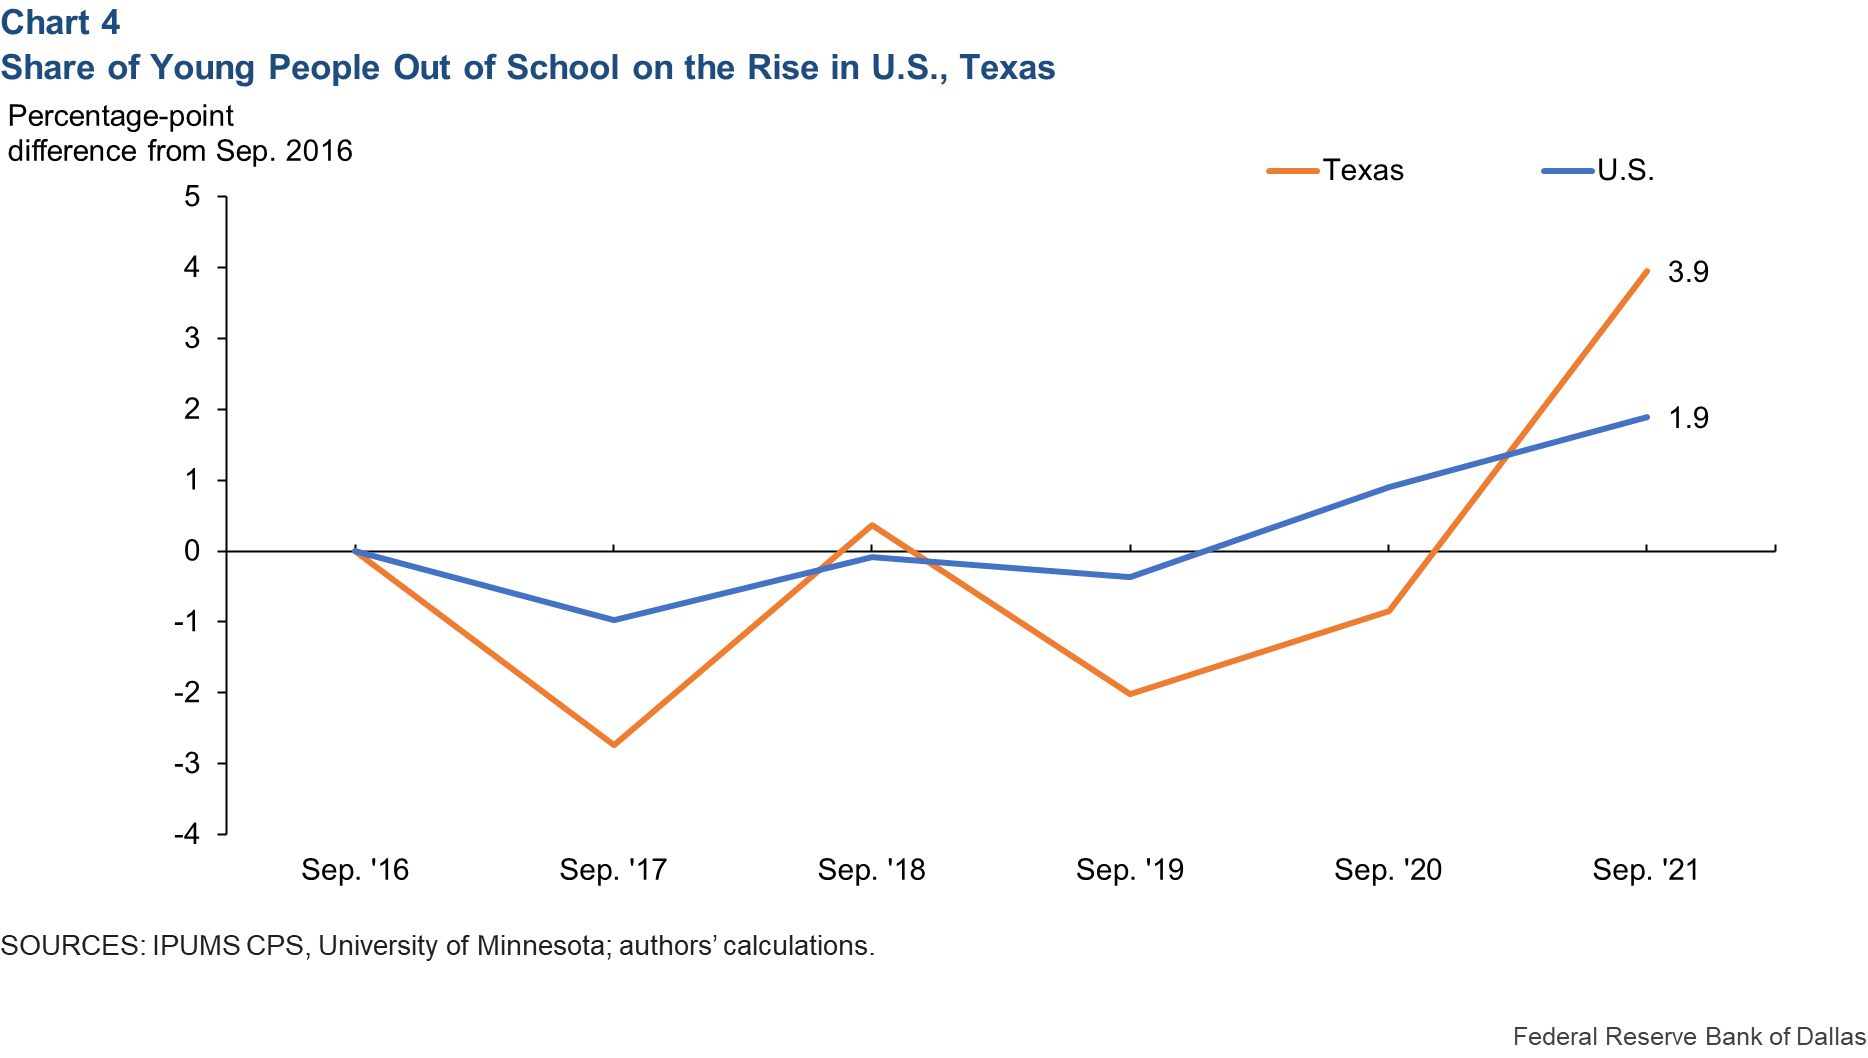 Share of Young People Out of School on the Rise in U.S., Texas